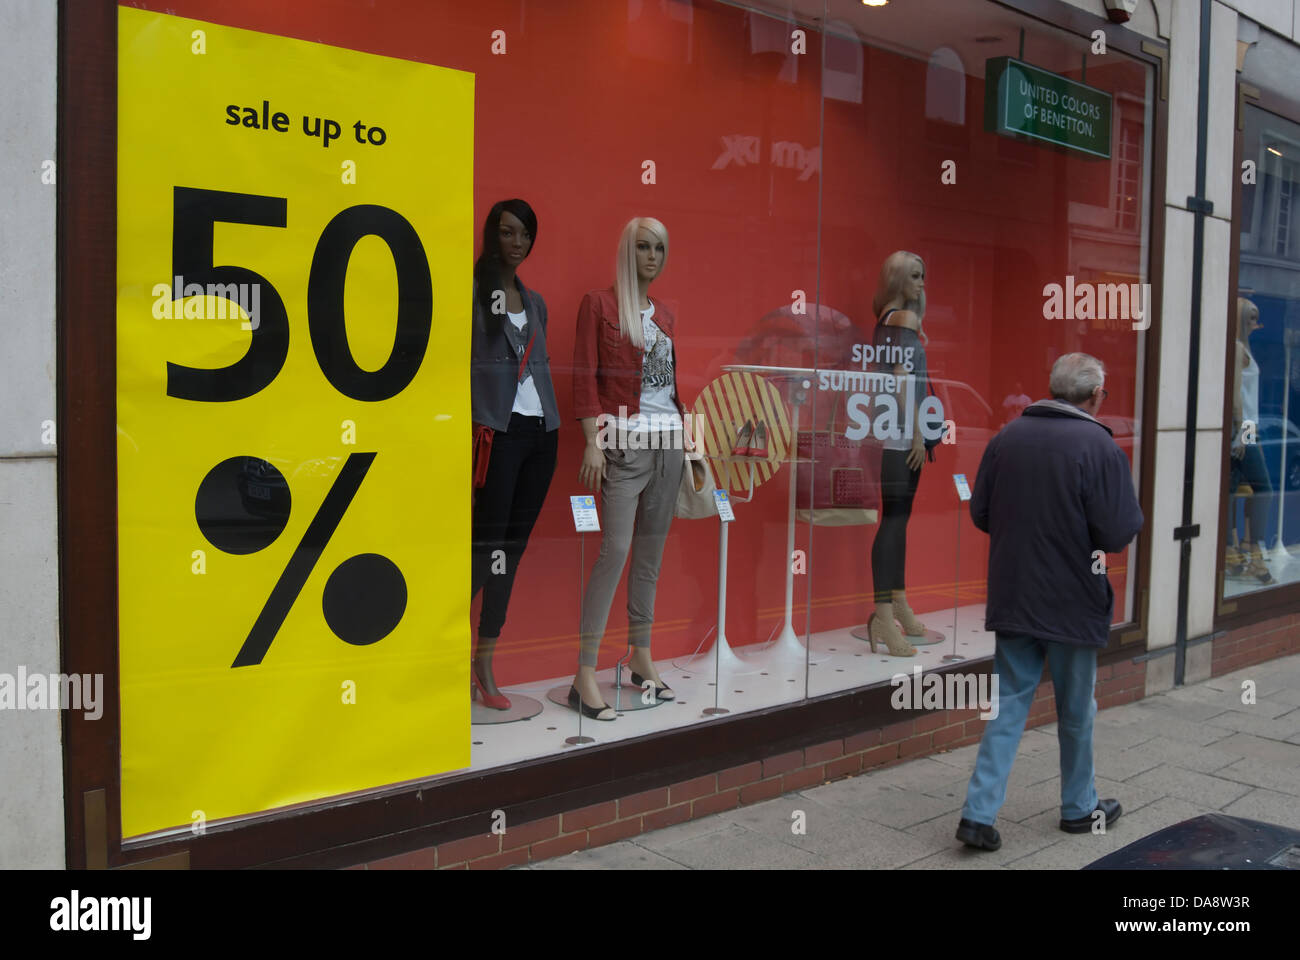 united colours of benetton shop window display advertising a sale with up  to 50% off, as man passes by Stock Photo - Alamy